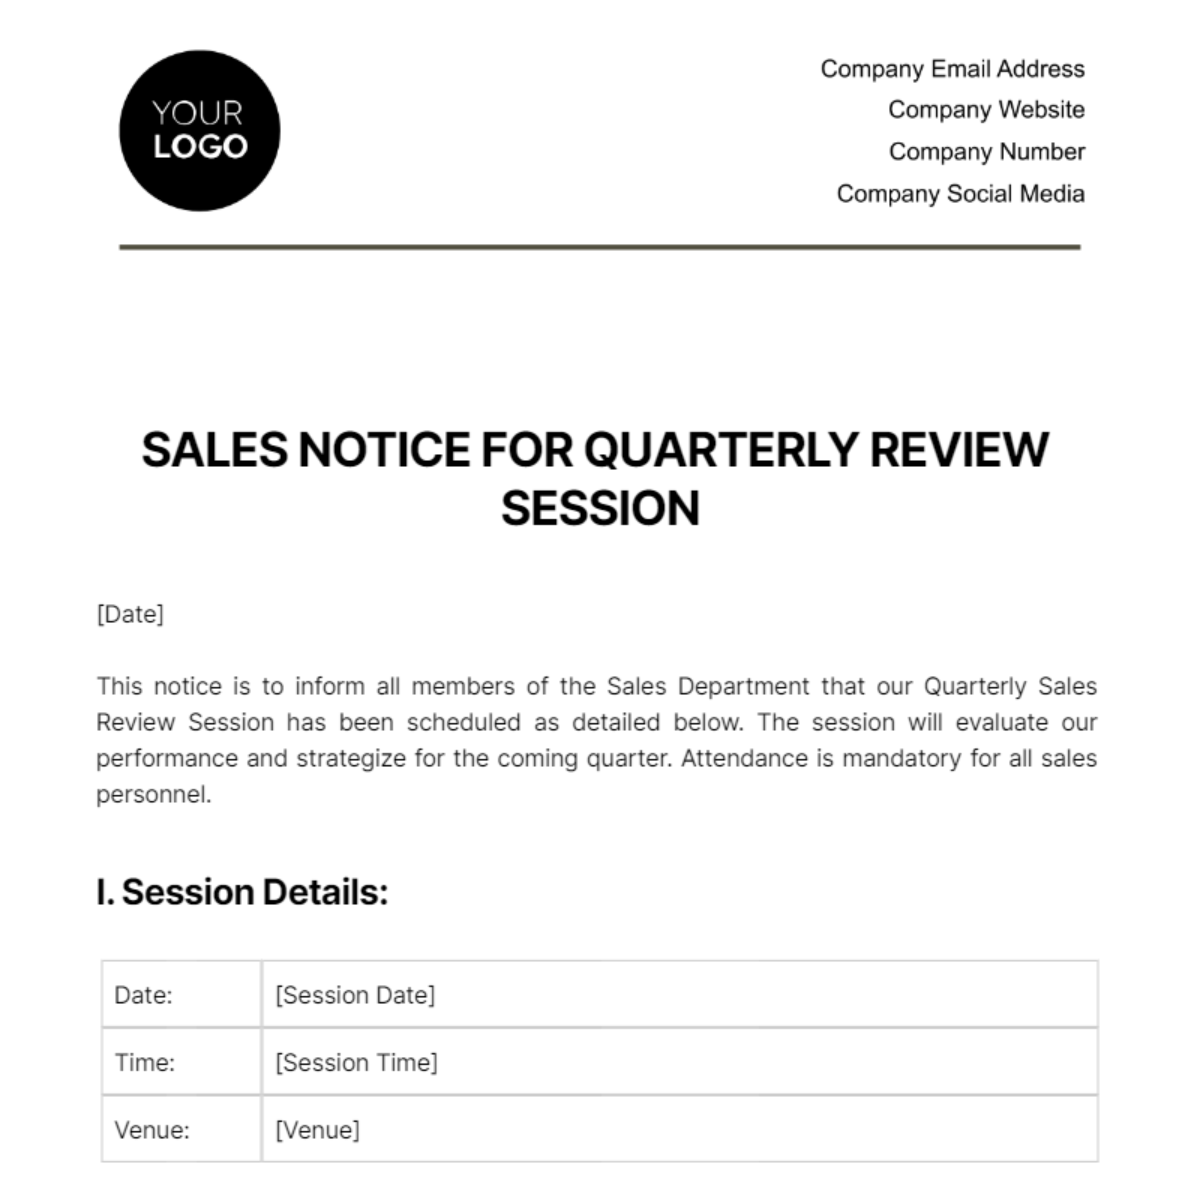 Sales Notice for Quarterly Review Session Template